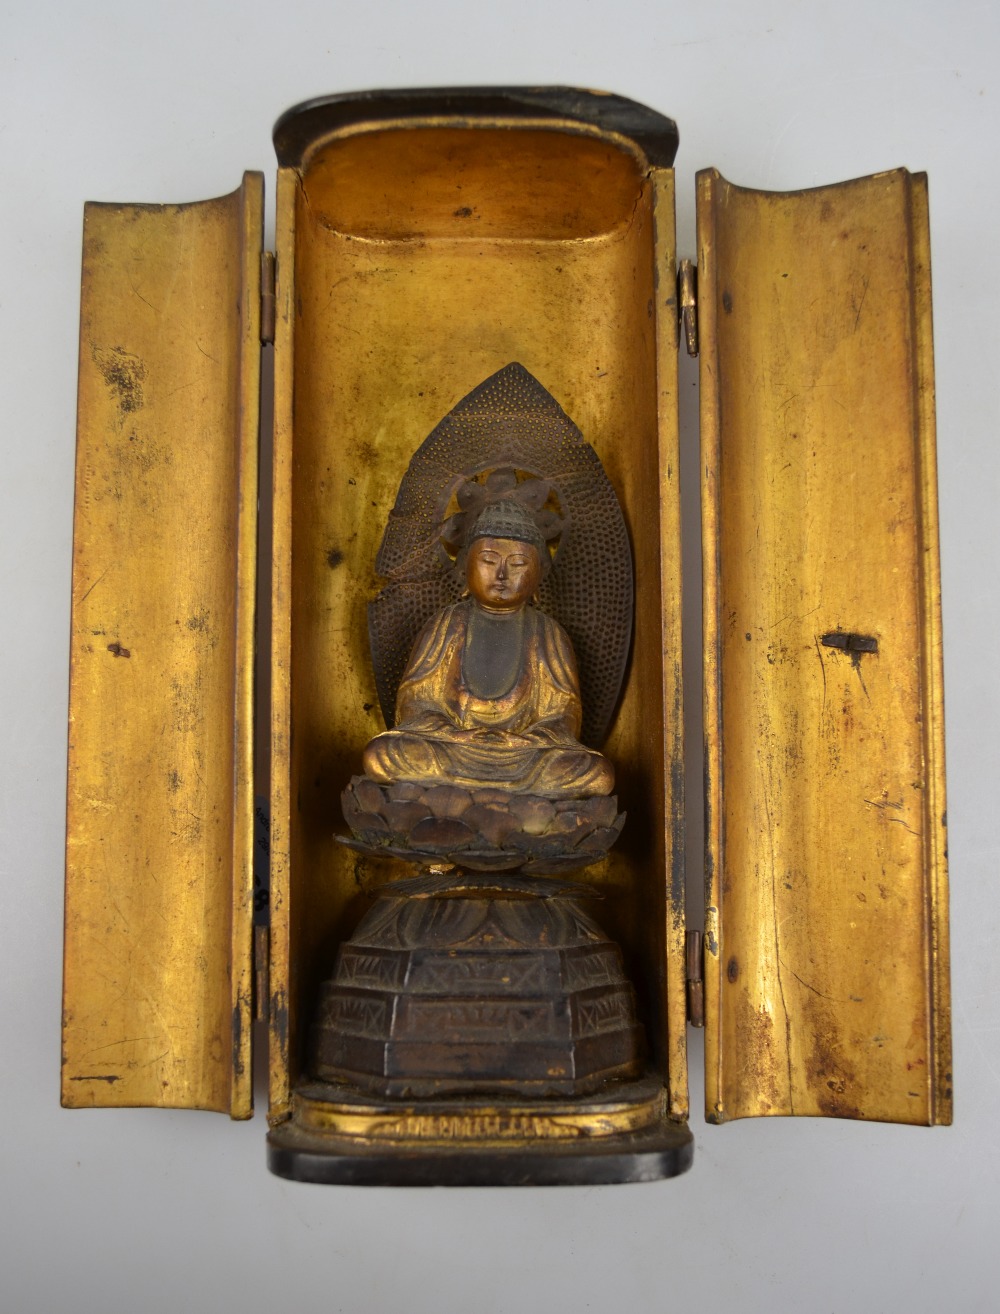 Japanese small lacquer Zushi opening to reveal a seated figure of Nyorai Buddha seated on a